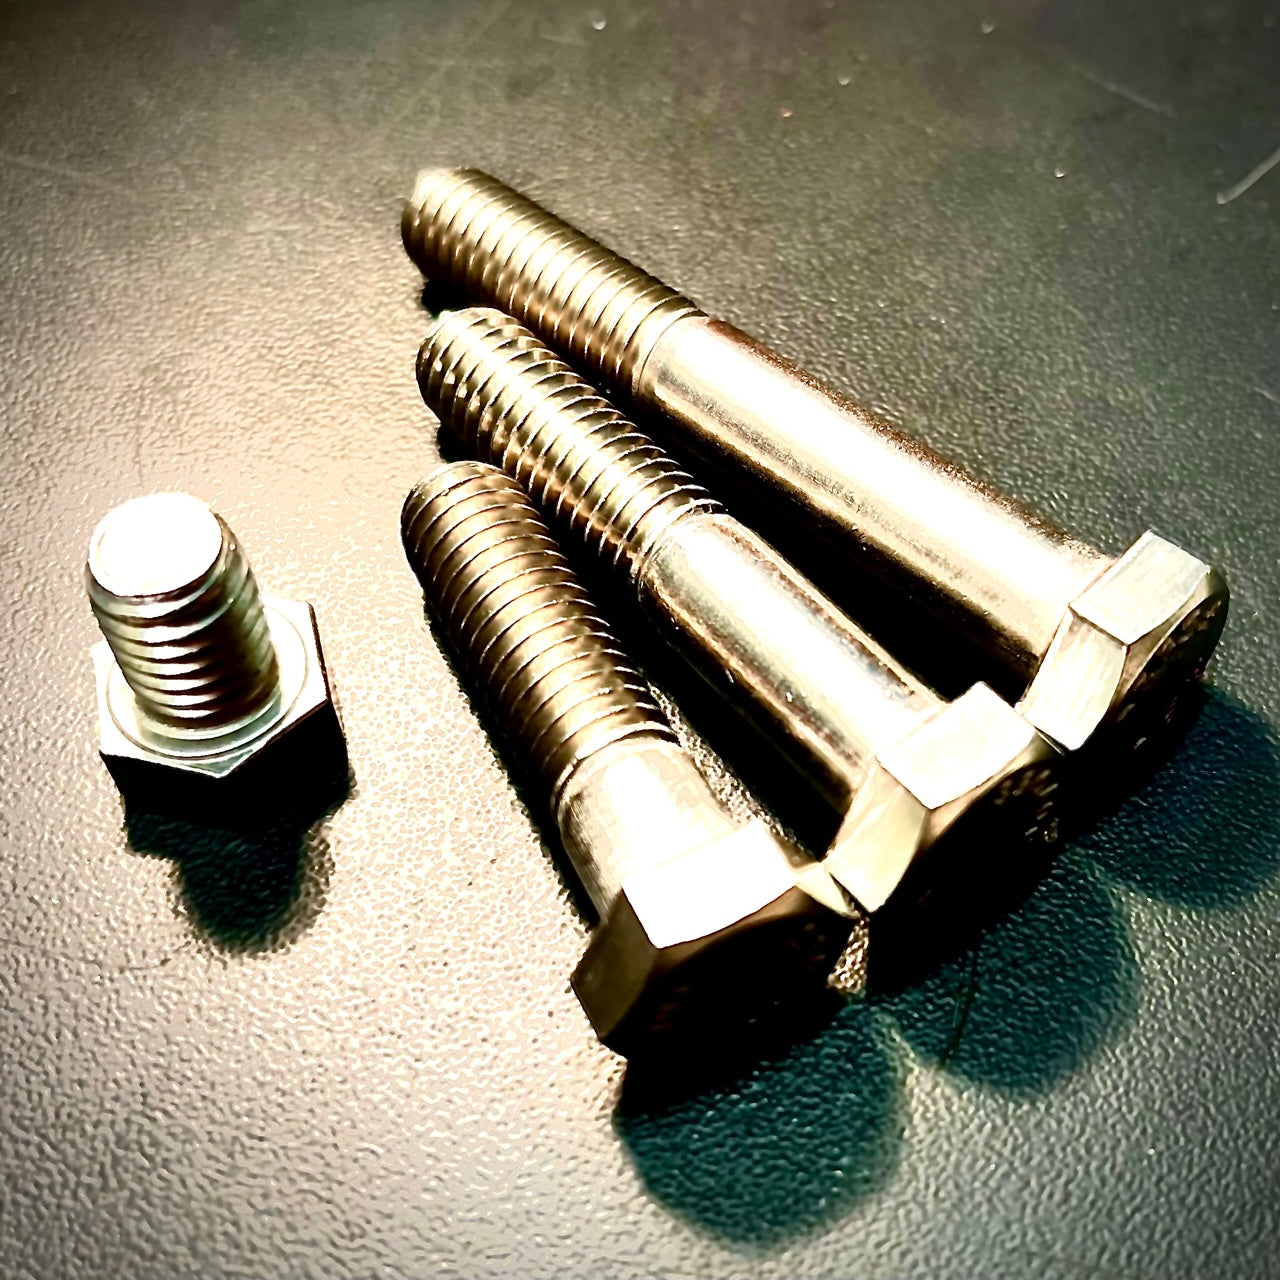 UNC 3/4"Hex Bolt and Set Screws A2 304 Stainless Steel DIN931 - Fixaball Ltd. Fixings and Fasteners UK